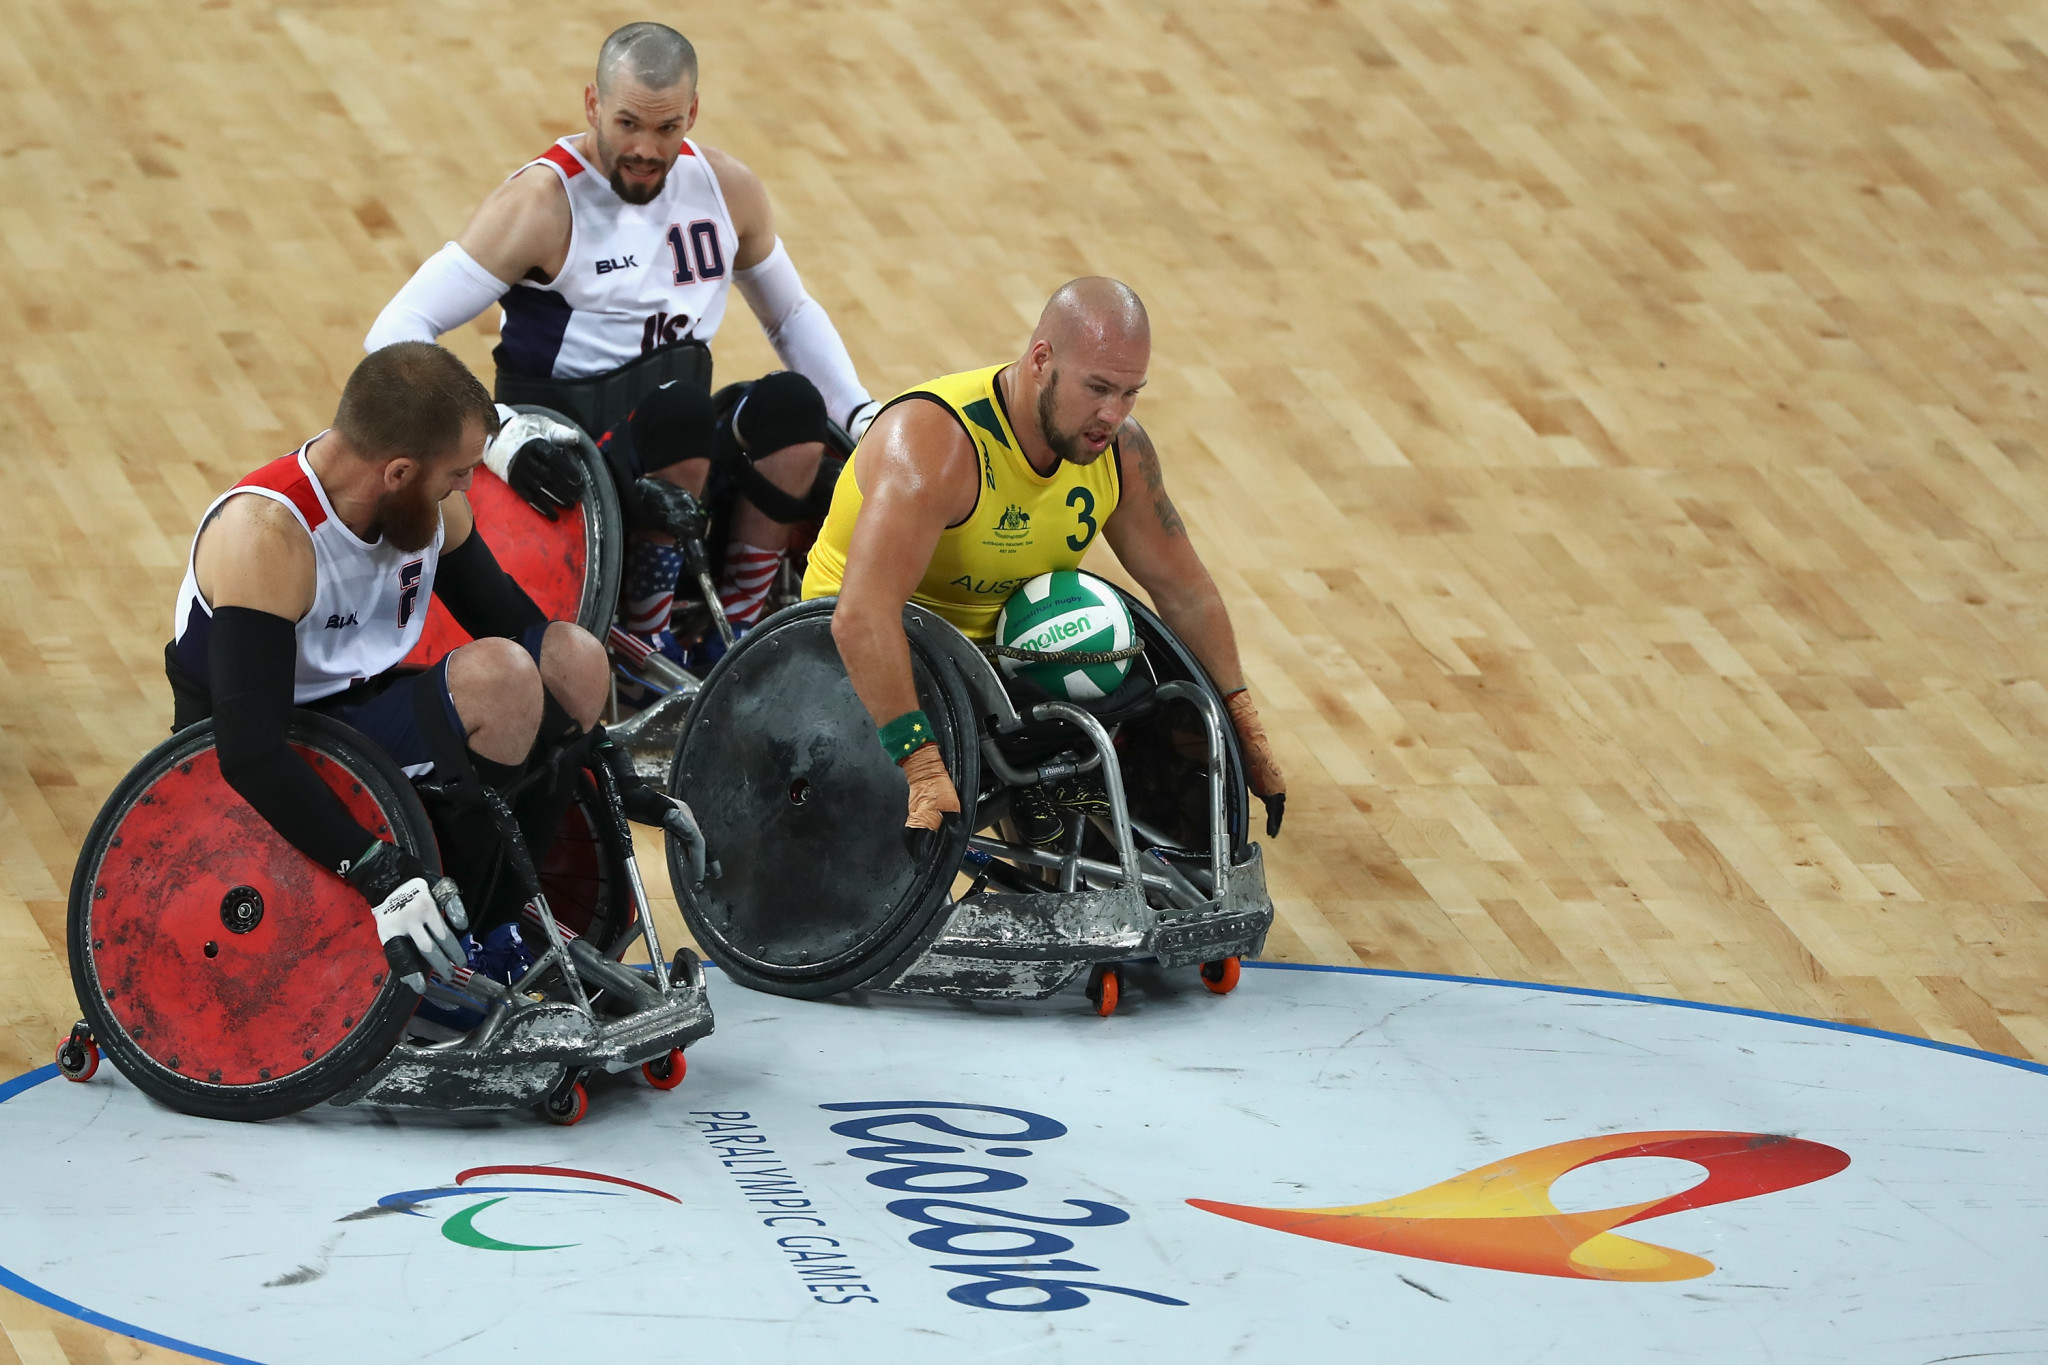 The winner of the wheelchair rugby contest at the Paralympics will no longer automatically qualify for the World Championships ©Getty Images